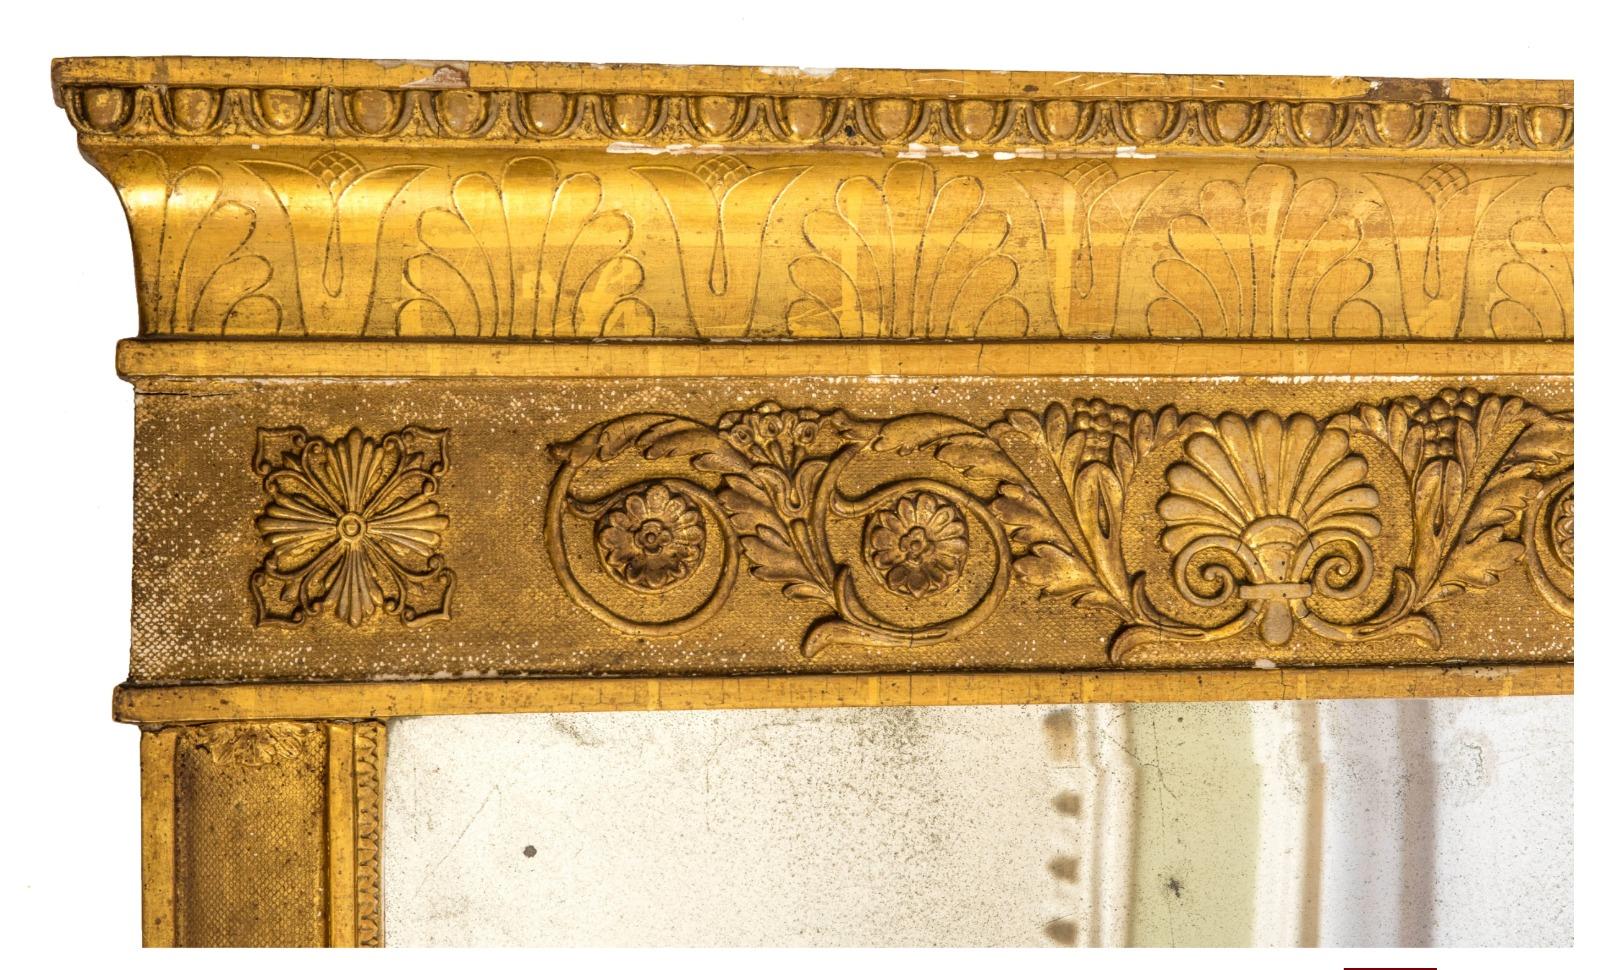 Empire Mirror Napoleon III 19th Century
Edge gilding with gold leaf and Empire motifs, swans, rosettes. 
Hand-cut mirror from the period. 
115x69cm
good condition